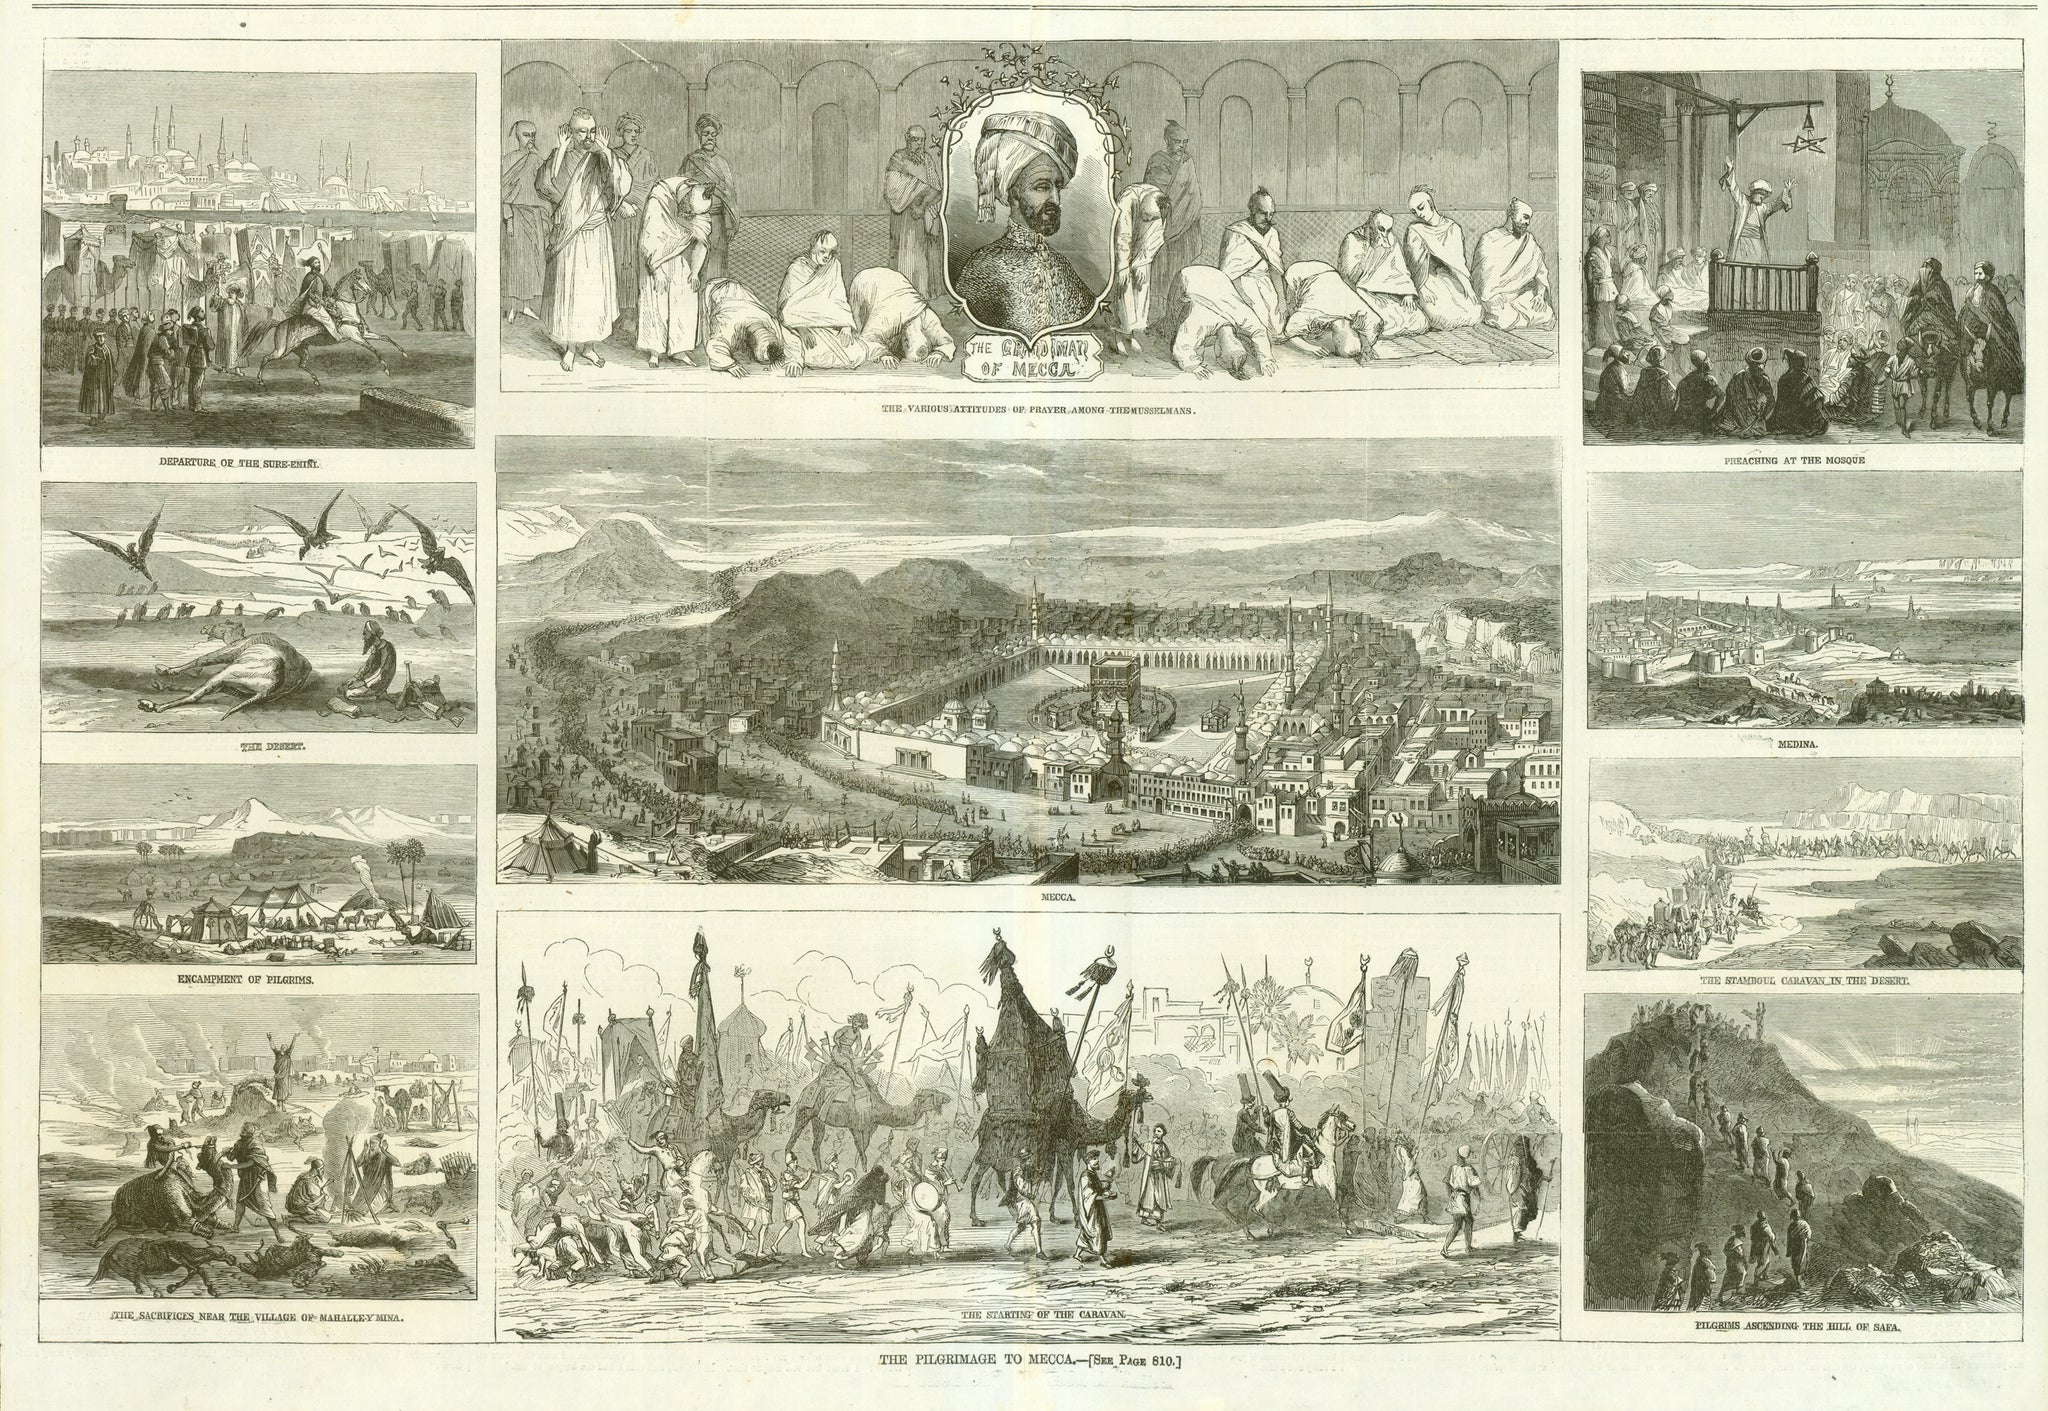 "The Pilgrimage to Mecca"  "Departure of the Sure-Emini - The Various Attitudes of Prayer Among the Musselmans. - Preaching at the Mosque - The Desert - Mecca - Medina - Encampment of Pilgrims - The Stamboul Caravan in the Desert - The Sacrifices Near the Village of Mahalley Mina - The Starting of the Caravan - Pilgrims Ascending the Hill of Safa"  Wood engraving published 1865. 